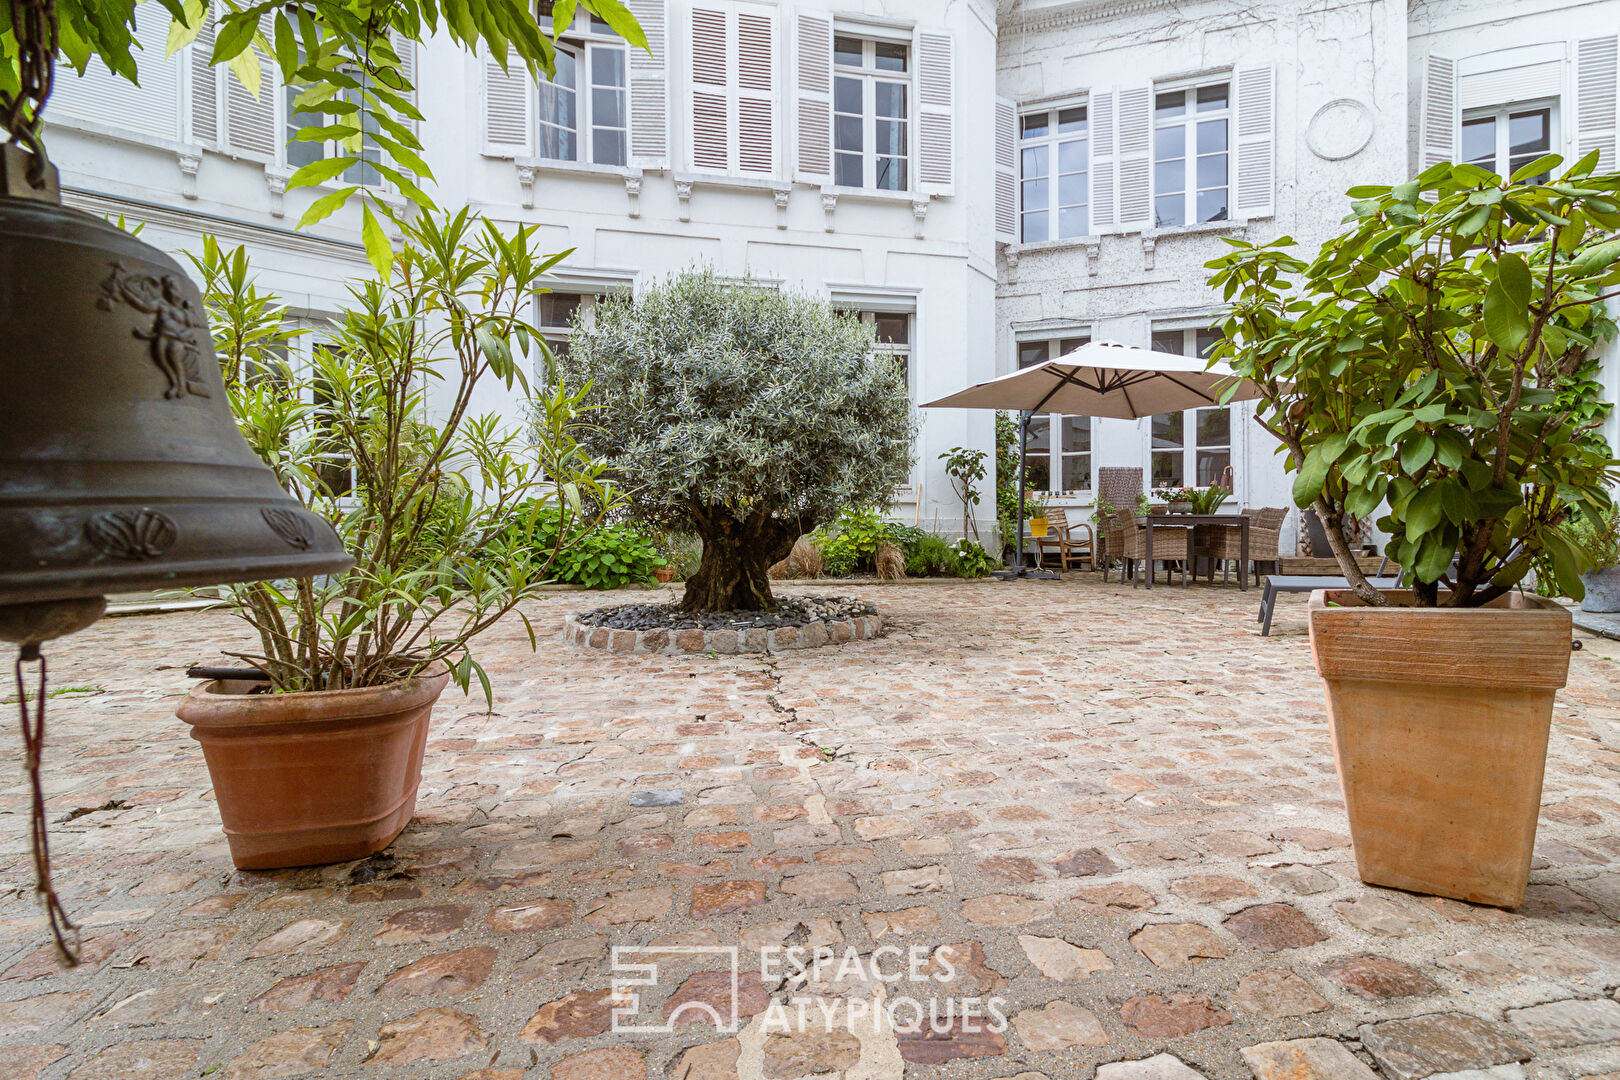 Magnificent residence with courtyard in the heart of Amiens city center